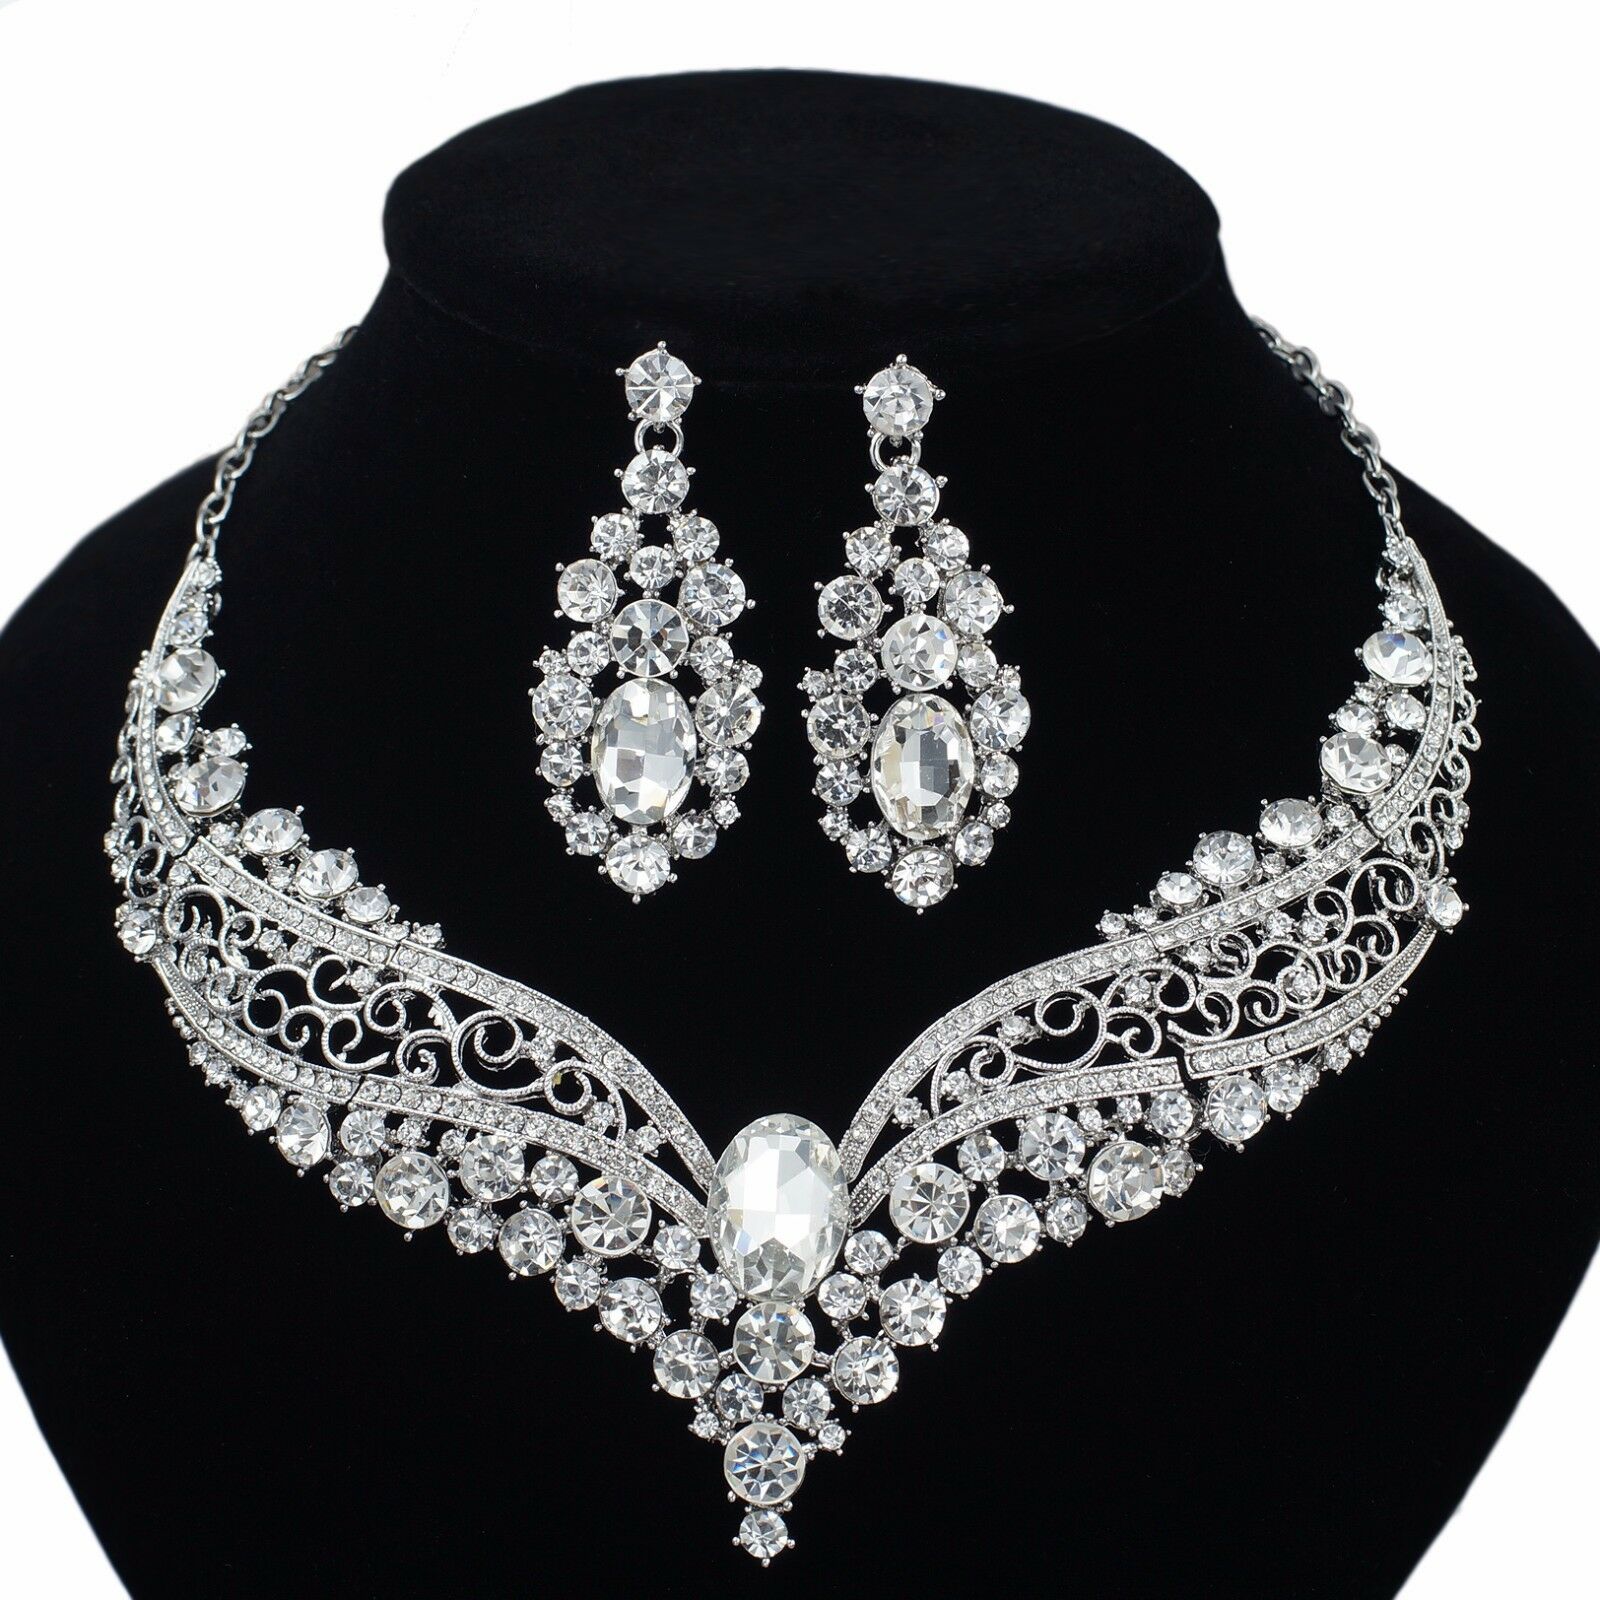 Yt297 Clear Rhinestone Crystal Earrings Necklace Set Bridal Wedding Party Gift